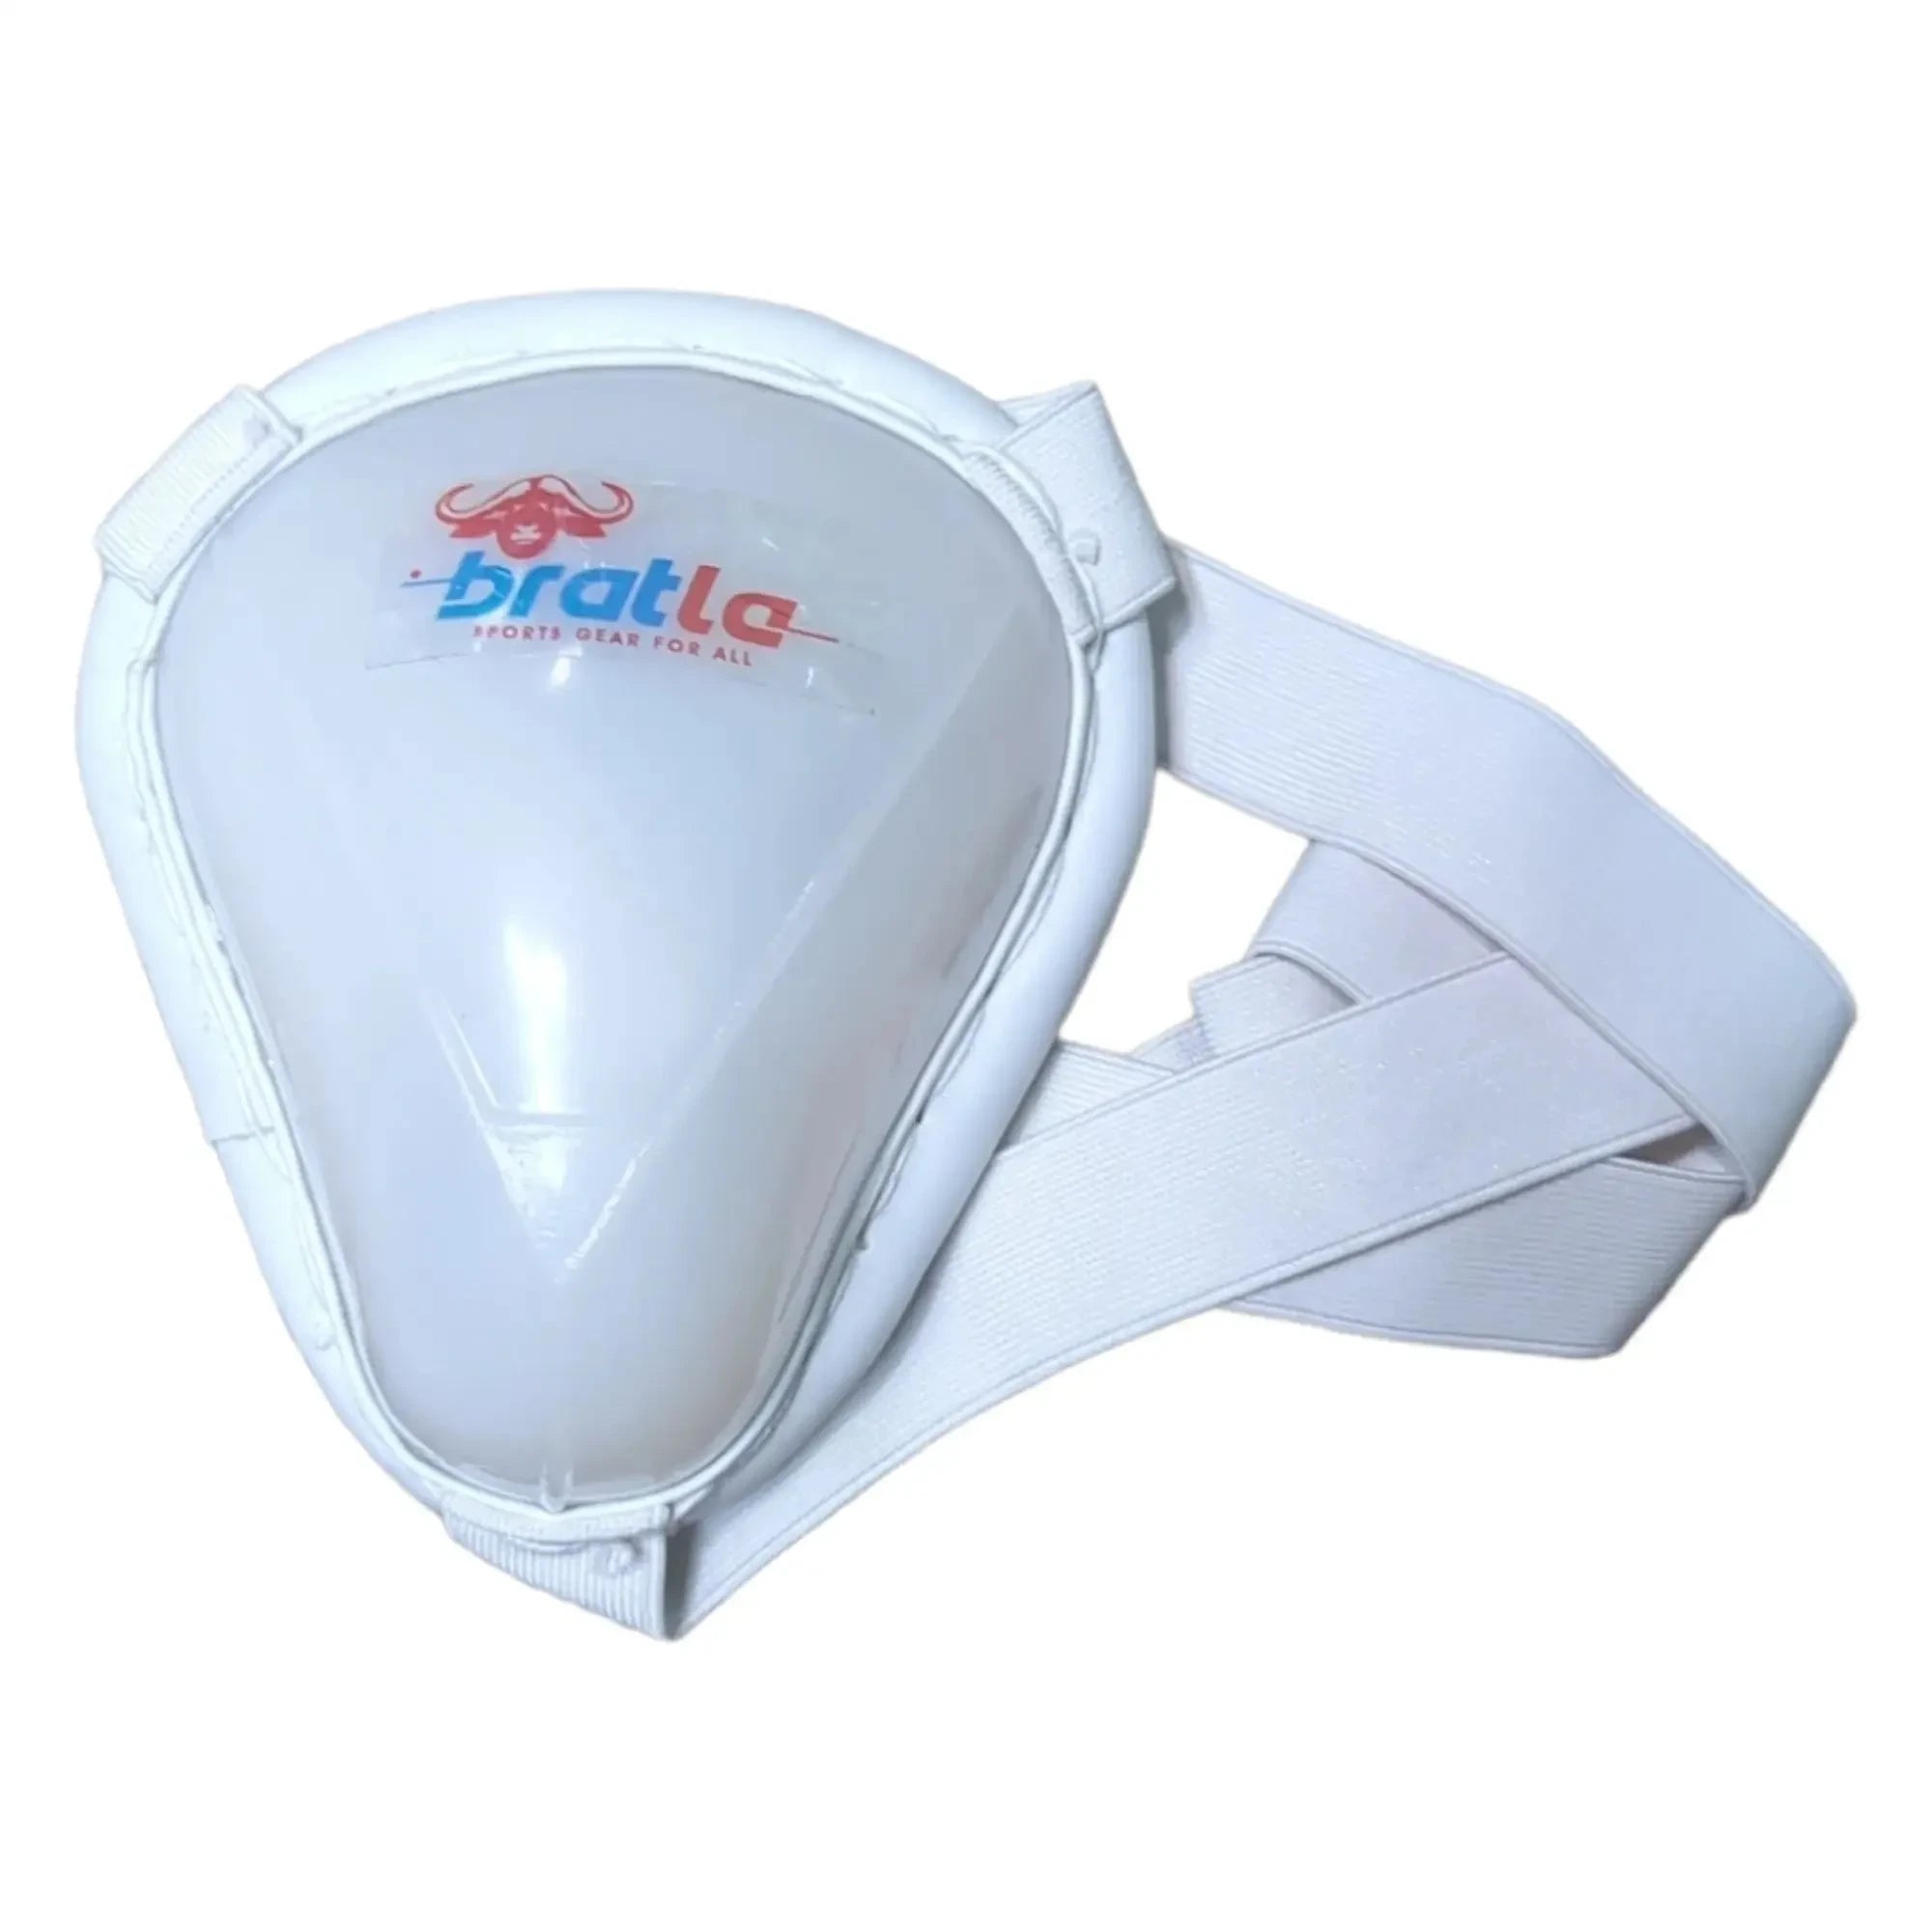 Cricket Abdominal Guard Padded Edging with Straps Foam Casing - BODY PROTECTORS - ABDO GUARDS